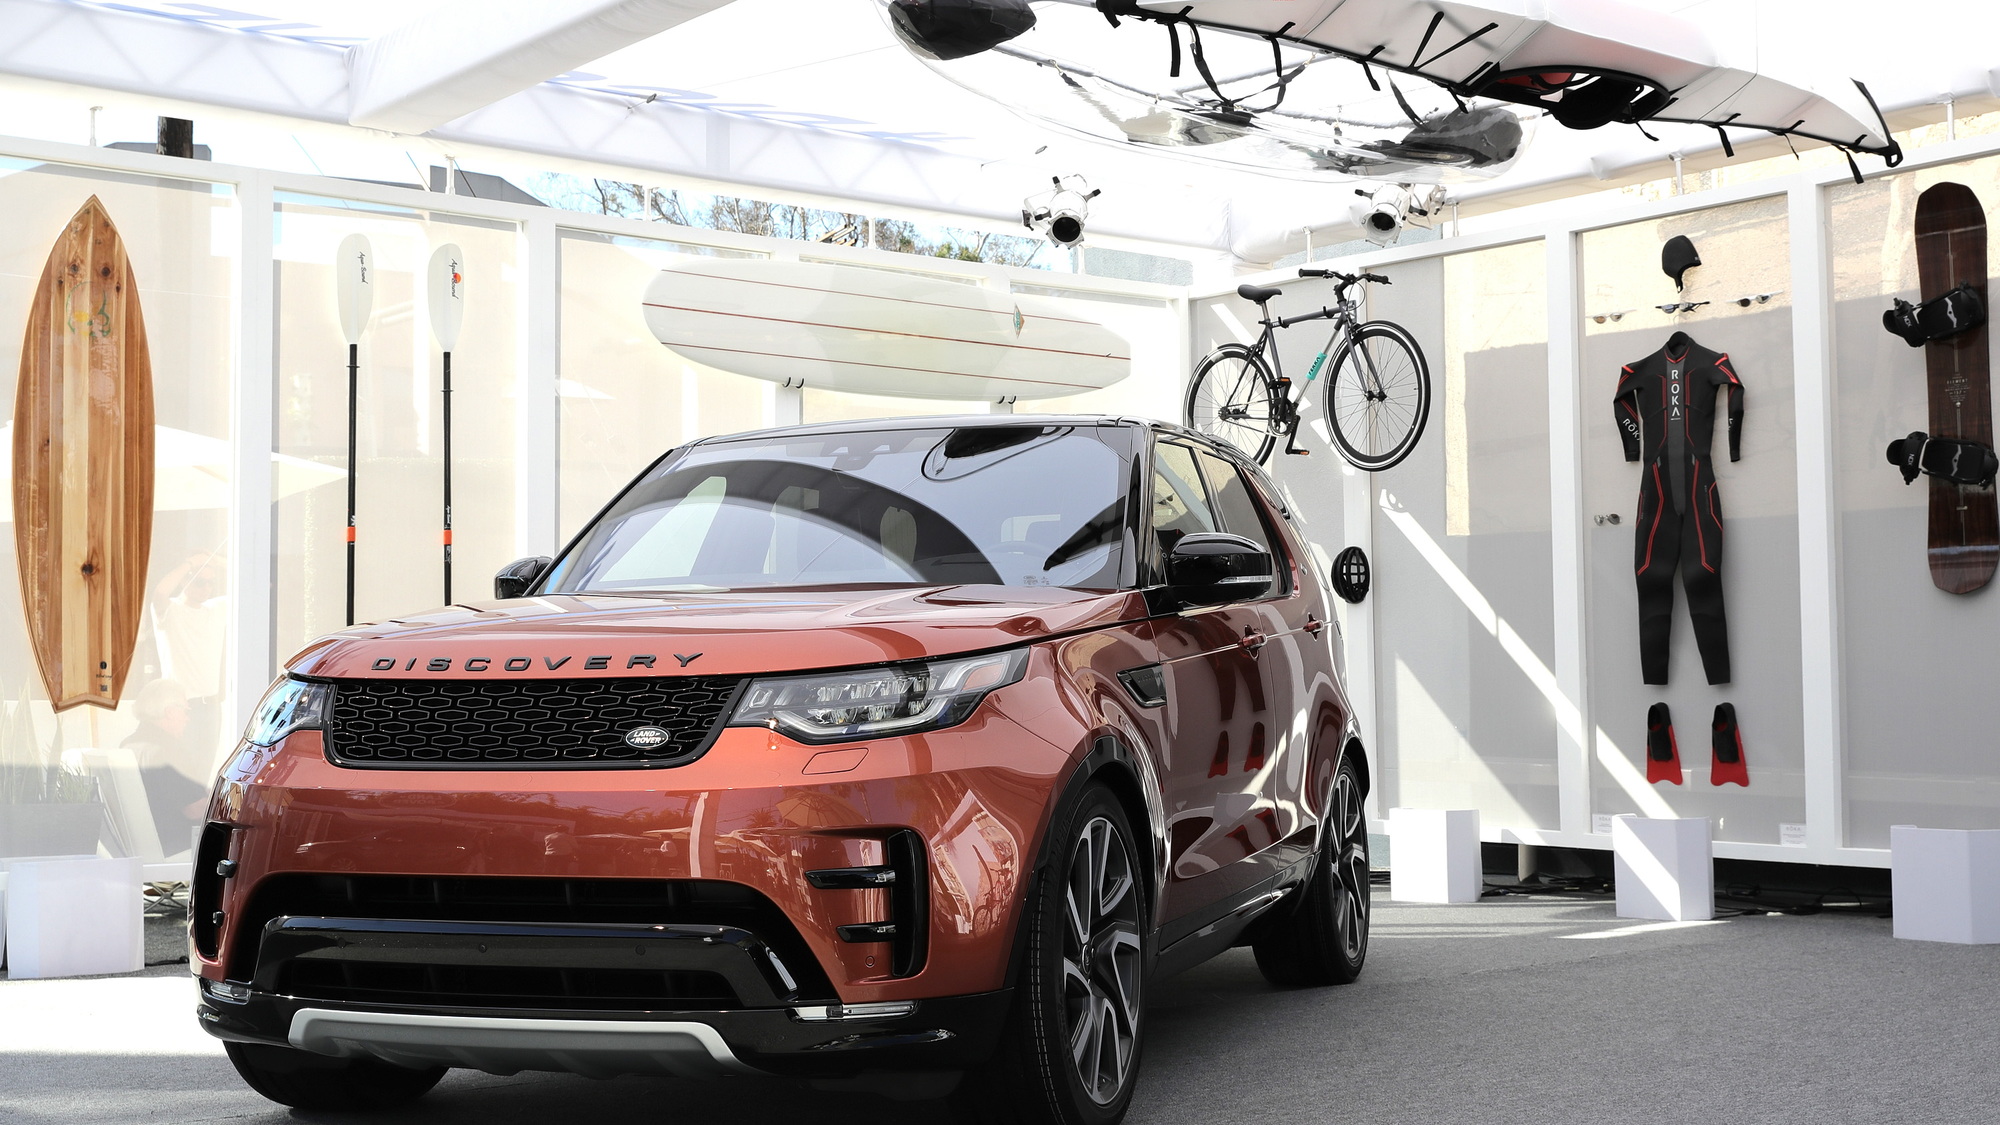 2017 Land Rover Discovery makes US debut in Venice